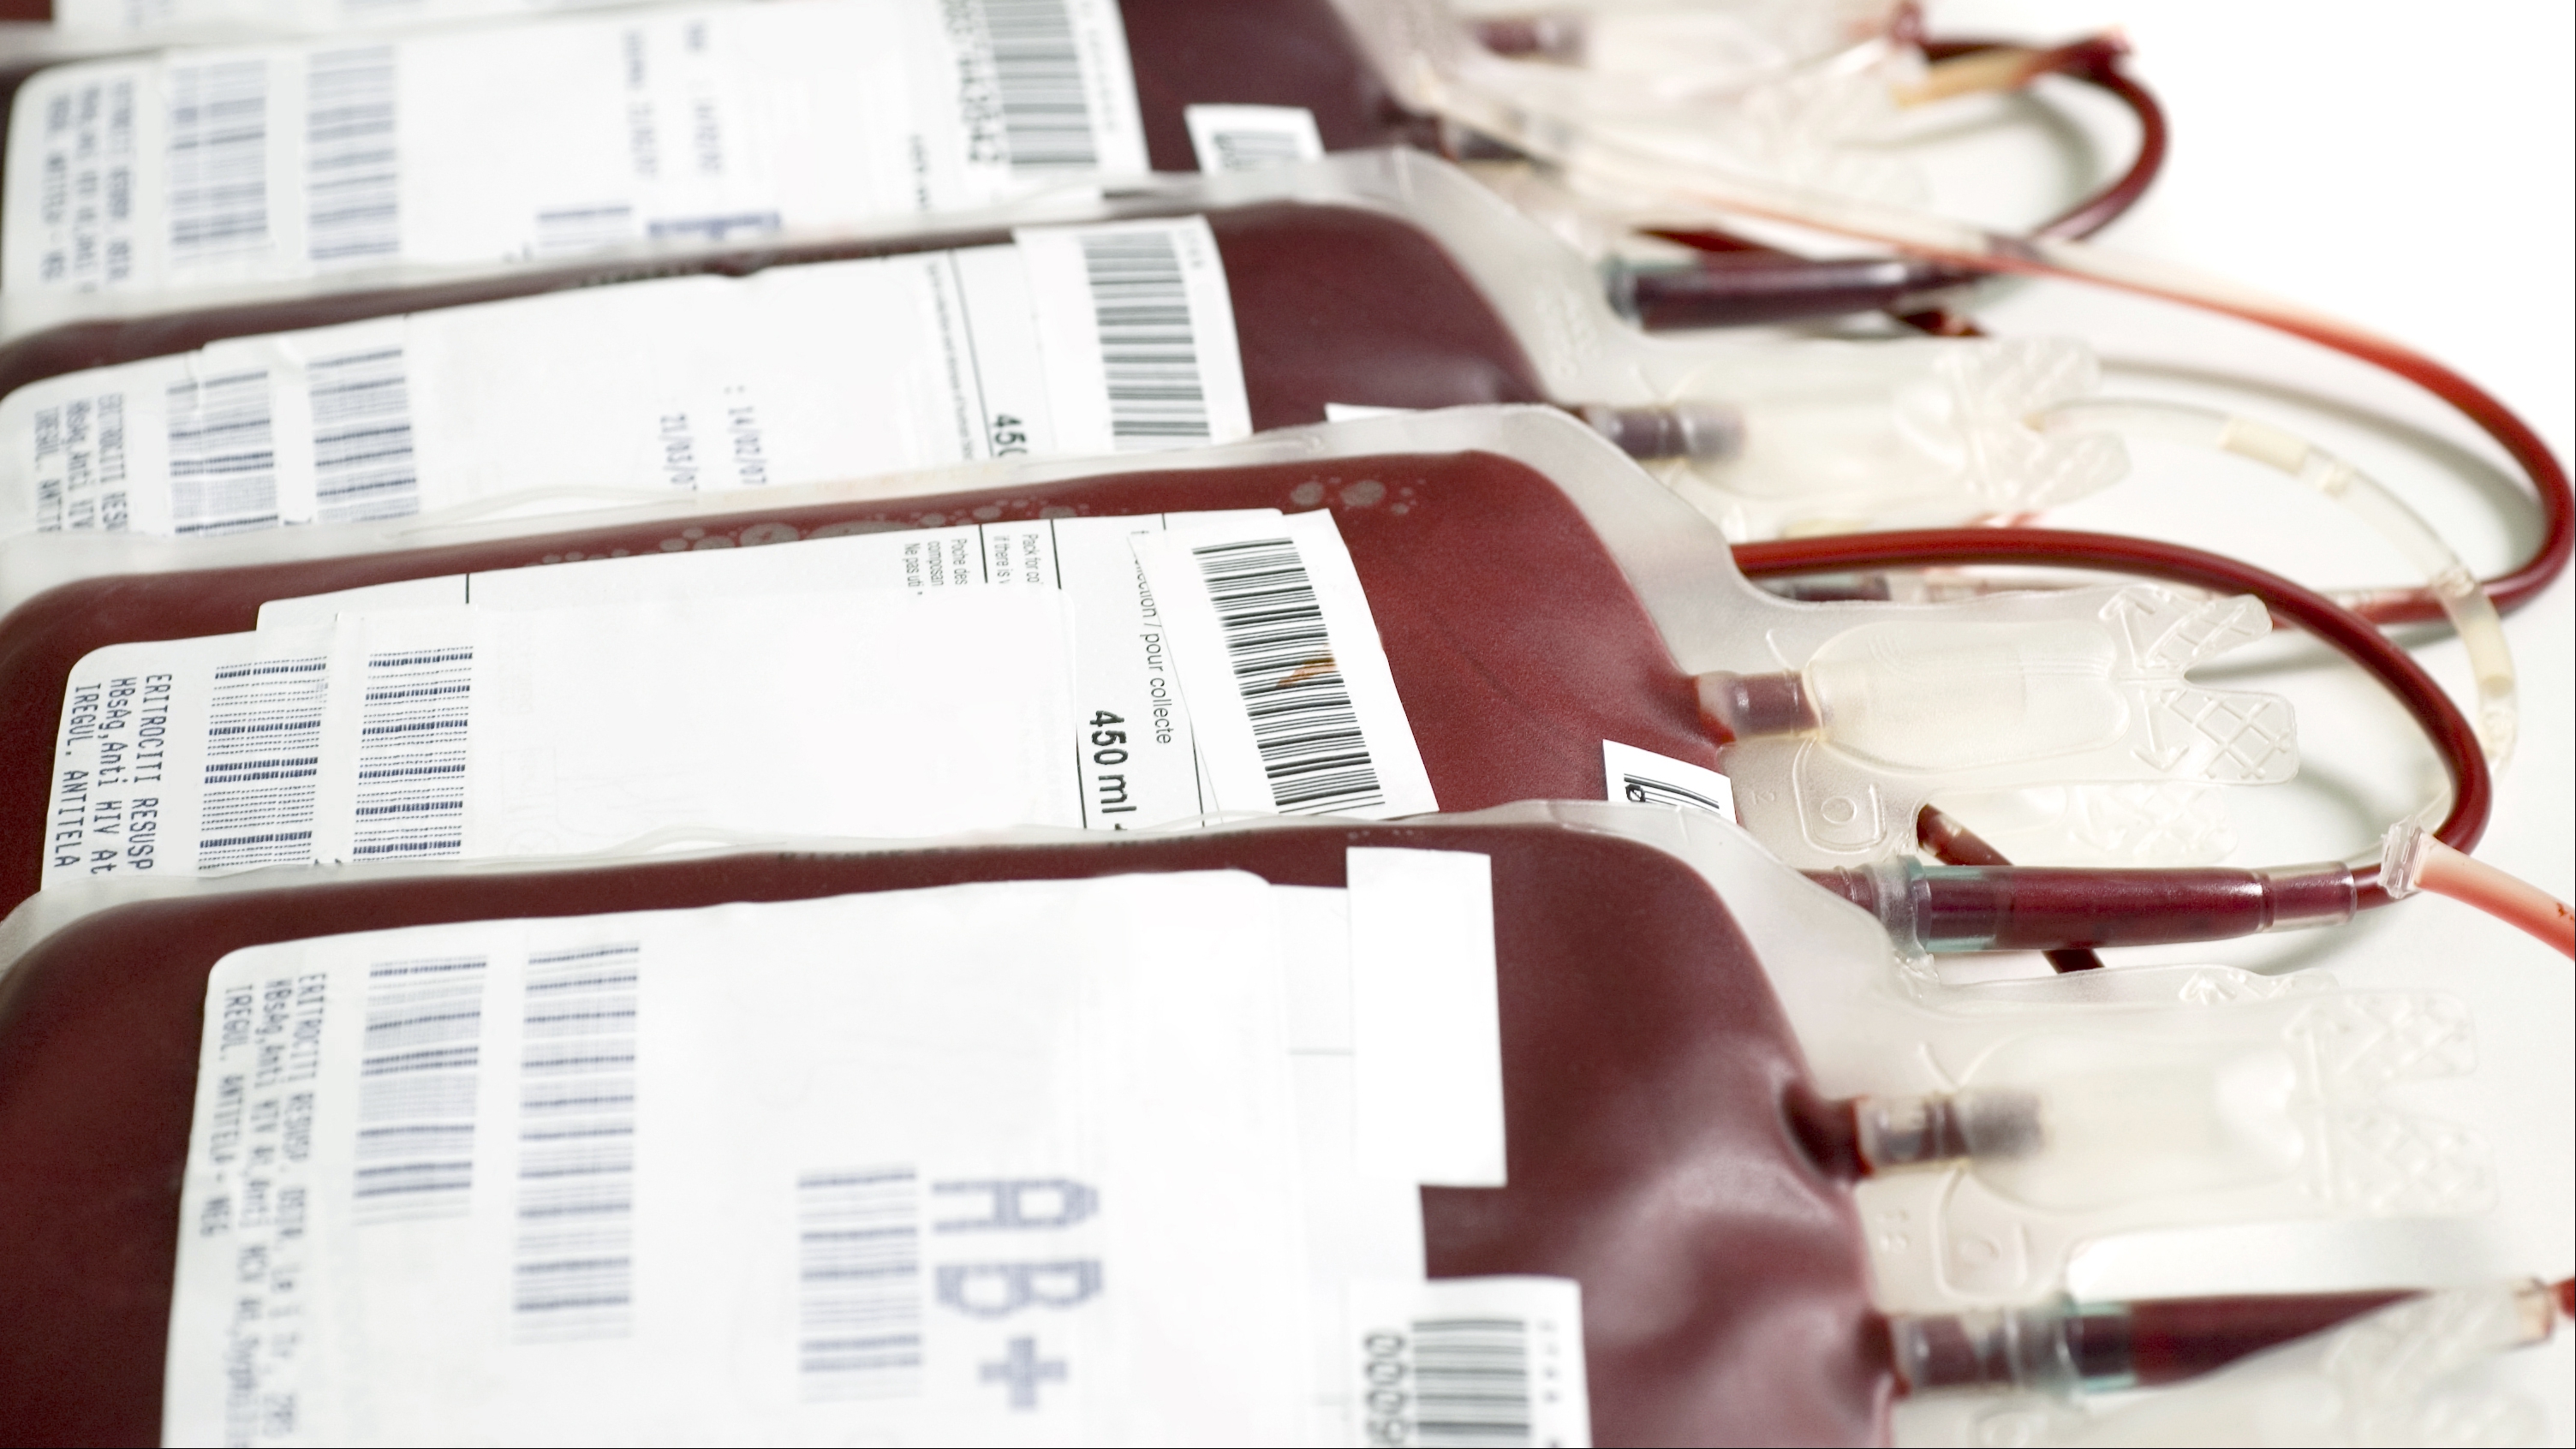 Blood Donor Program - Mayo Clinic - We need your help The Mayo Clinic  Blood Donor Center has an immediate need for O Positive blood. Will you  please pass along this urgent